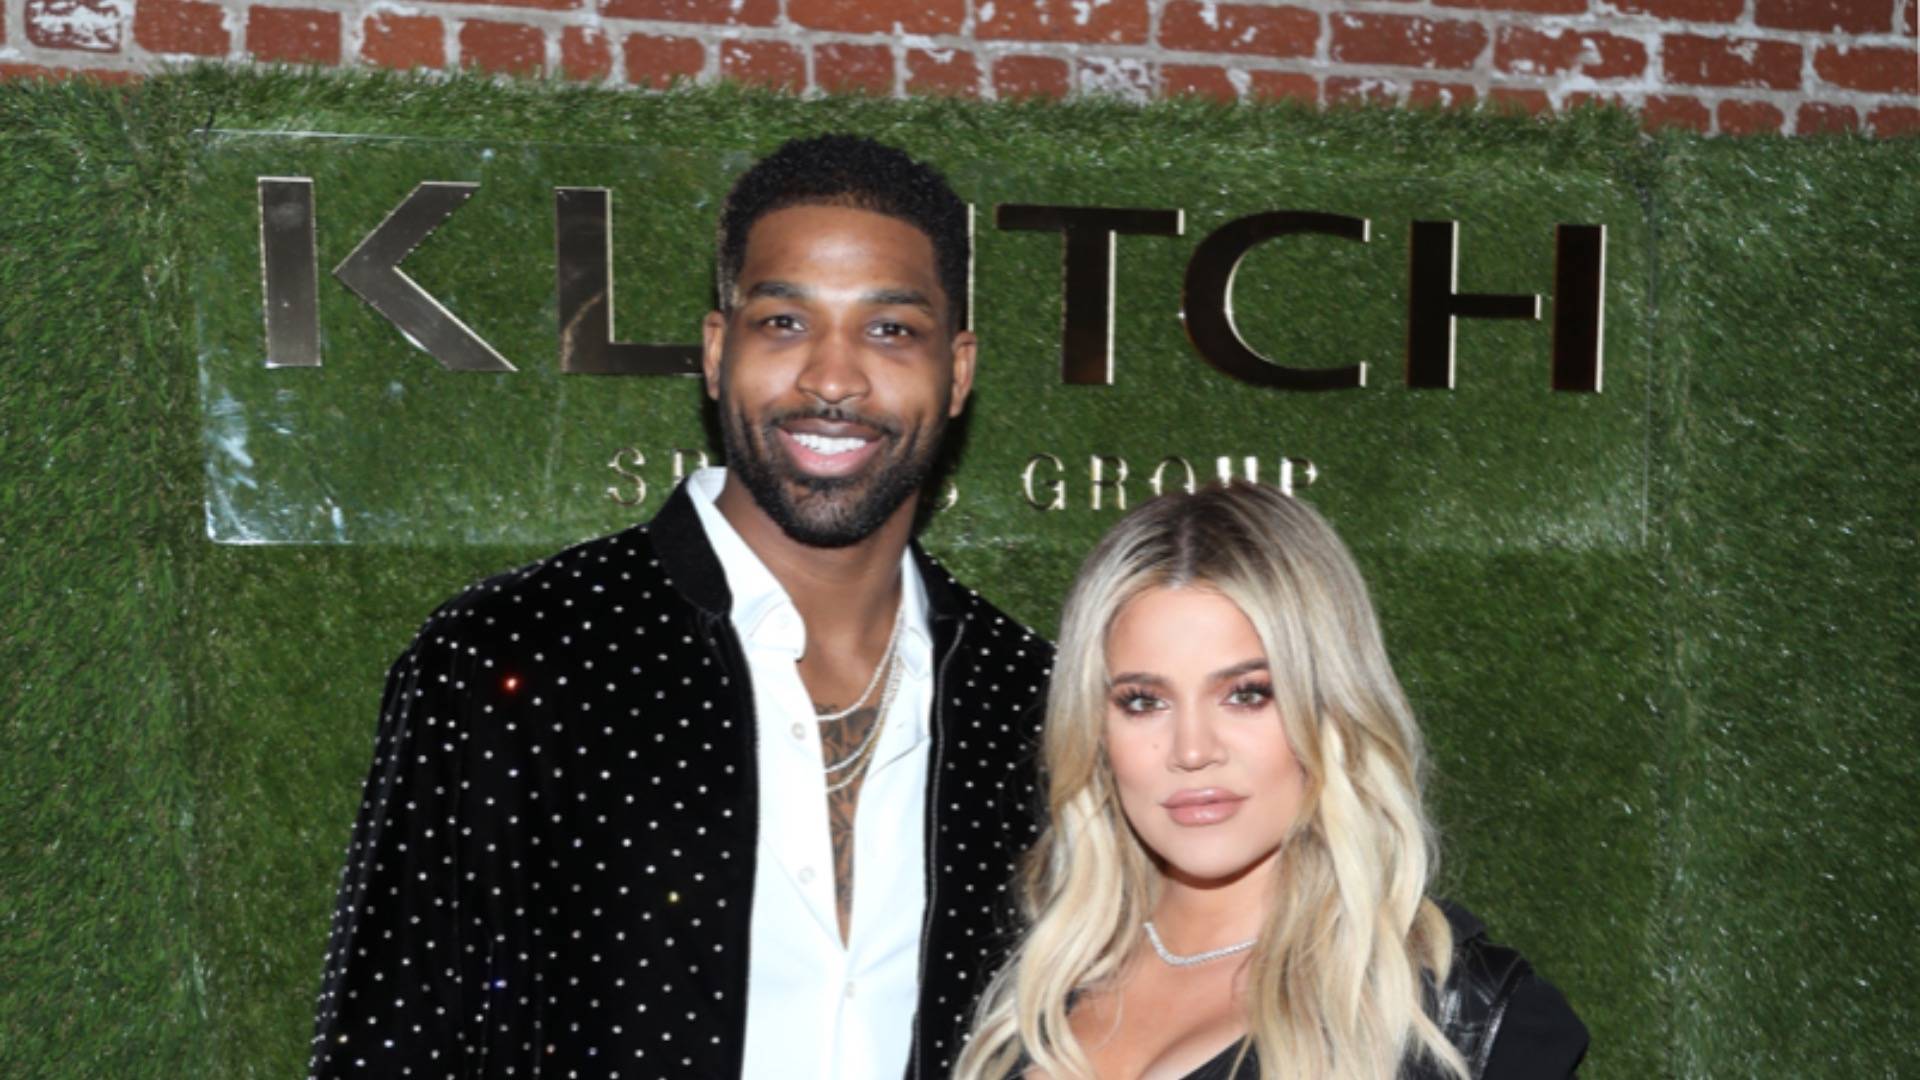 Khloe Kardashian and Tristan Thompson posing in front of synthetic green grass background